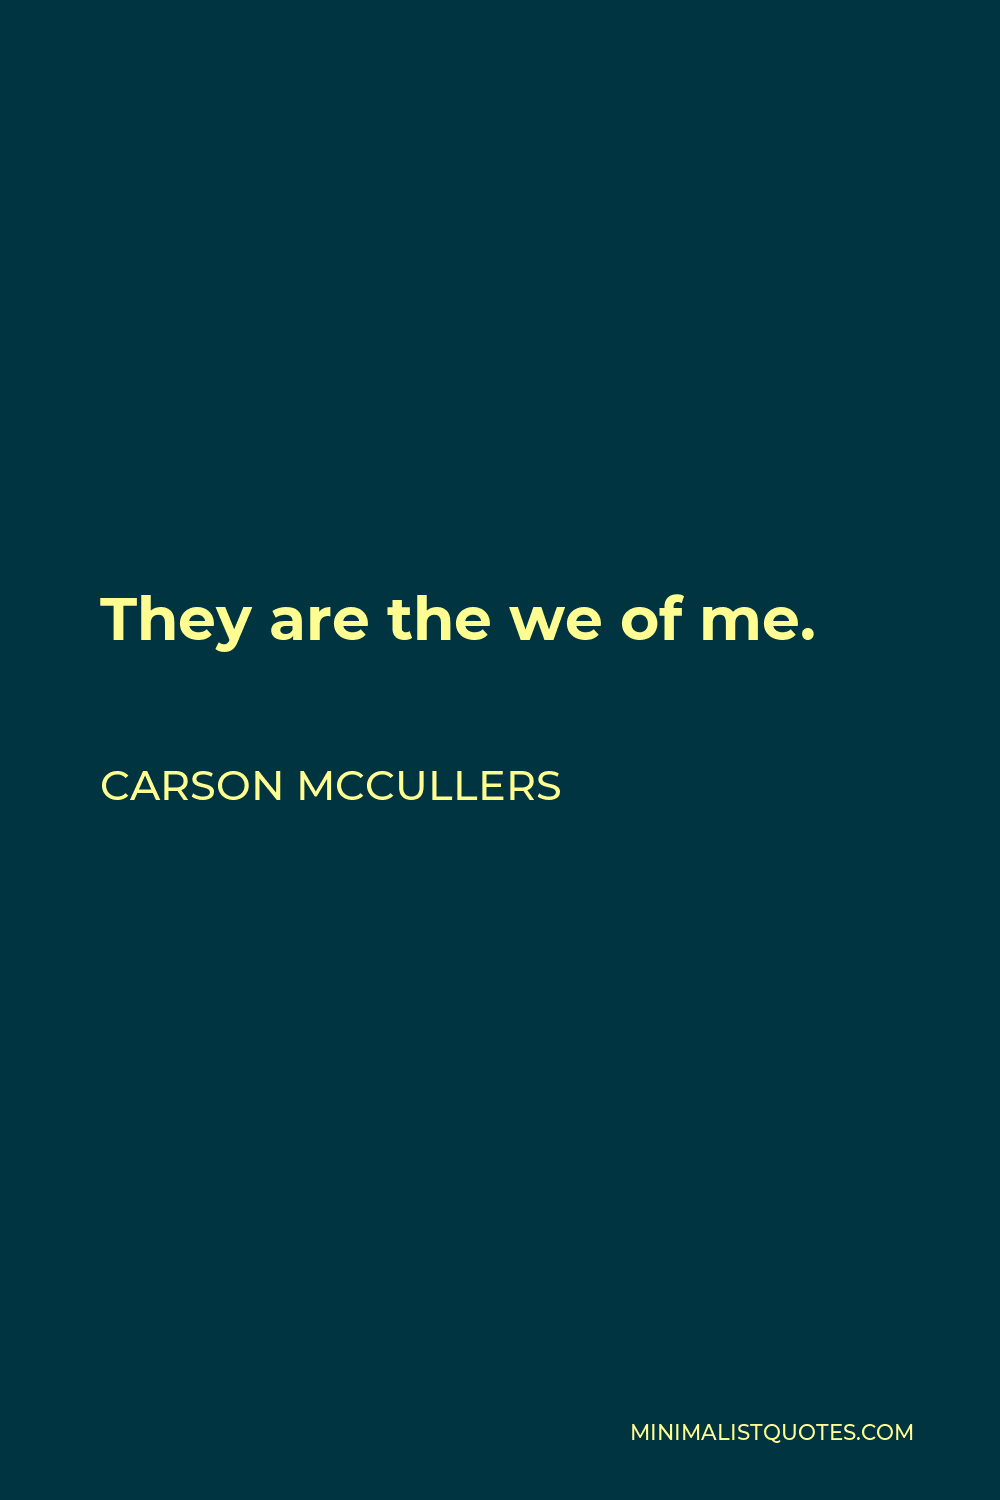 Carson McCullers Quote - They are the we of me.